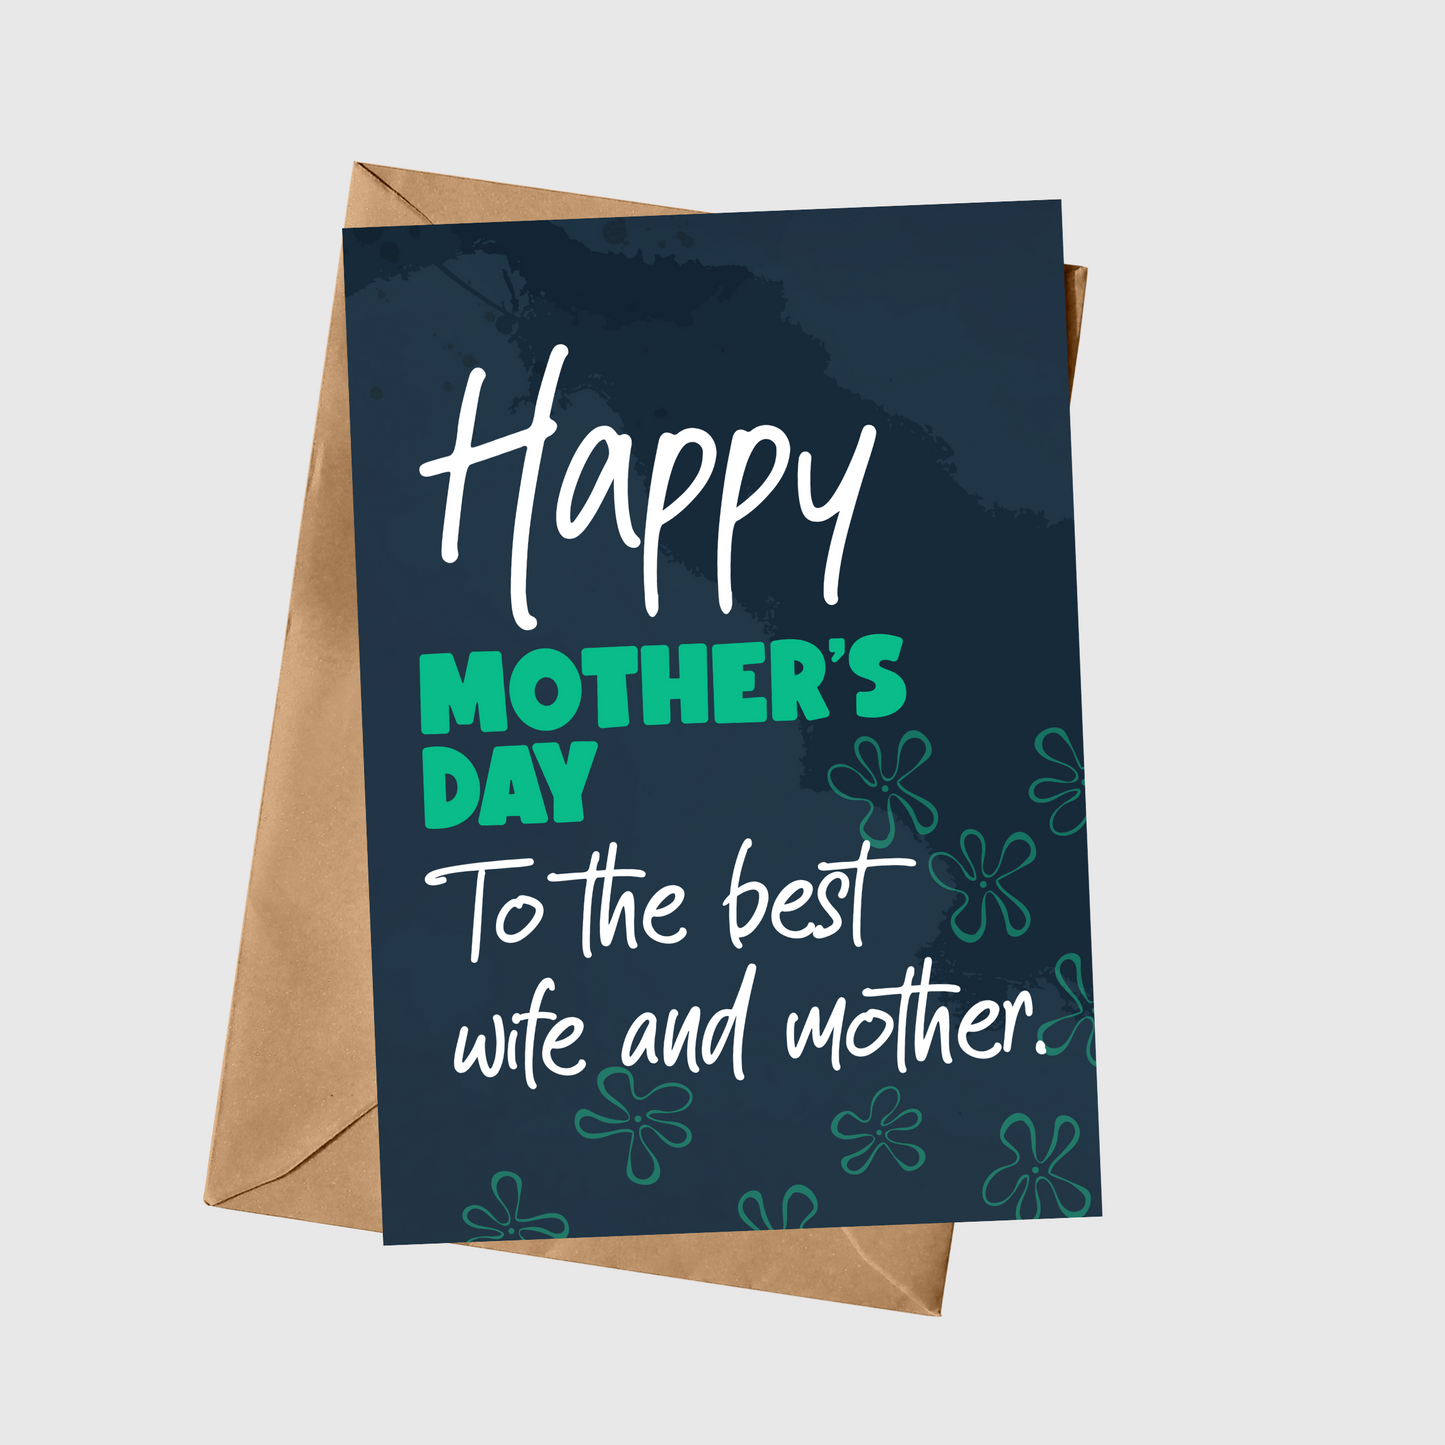 To the Best Wife and Mother